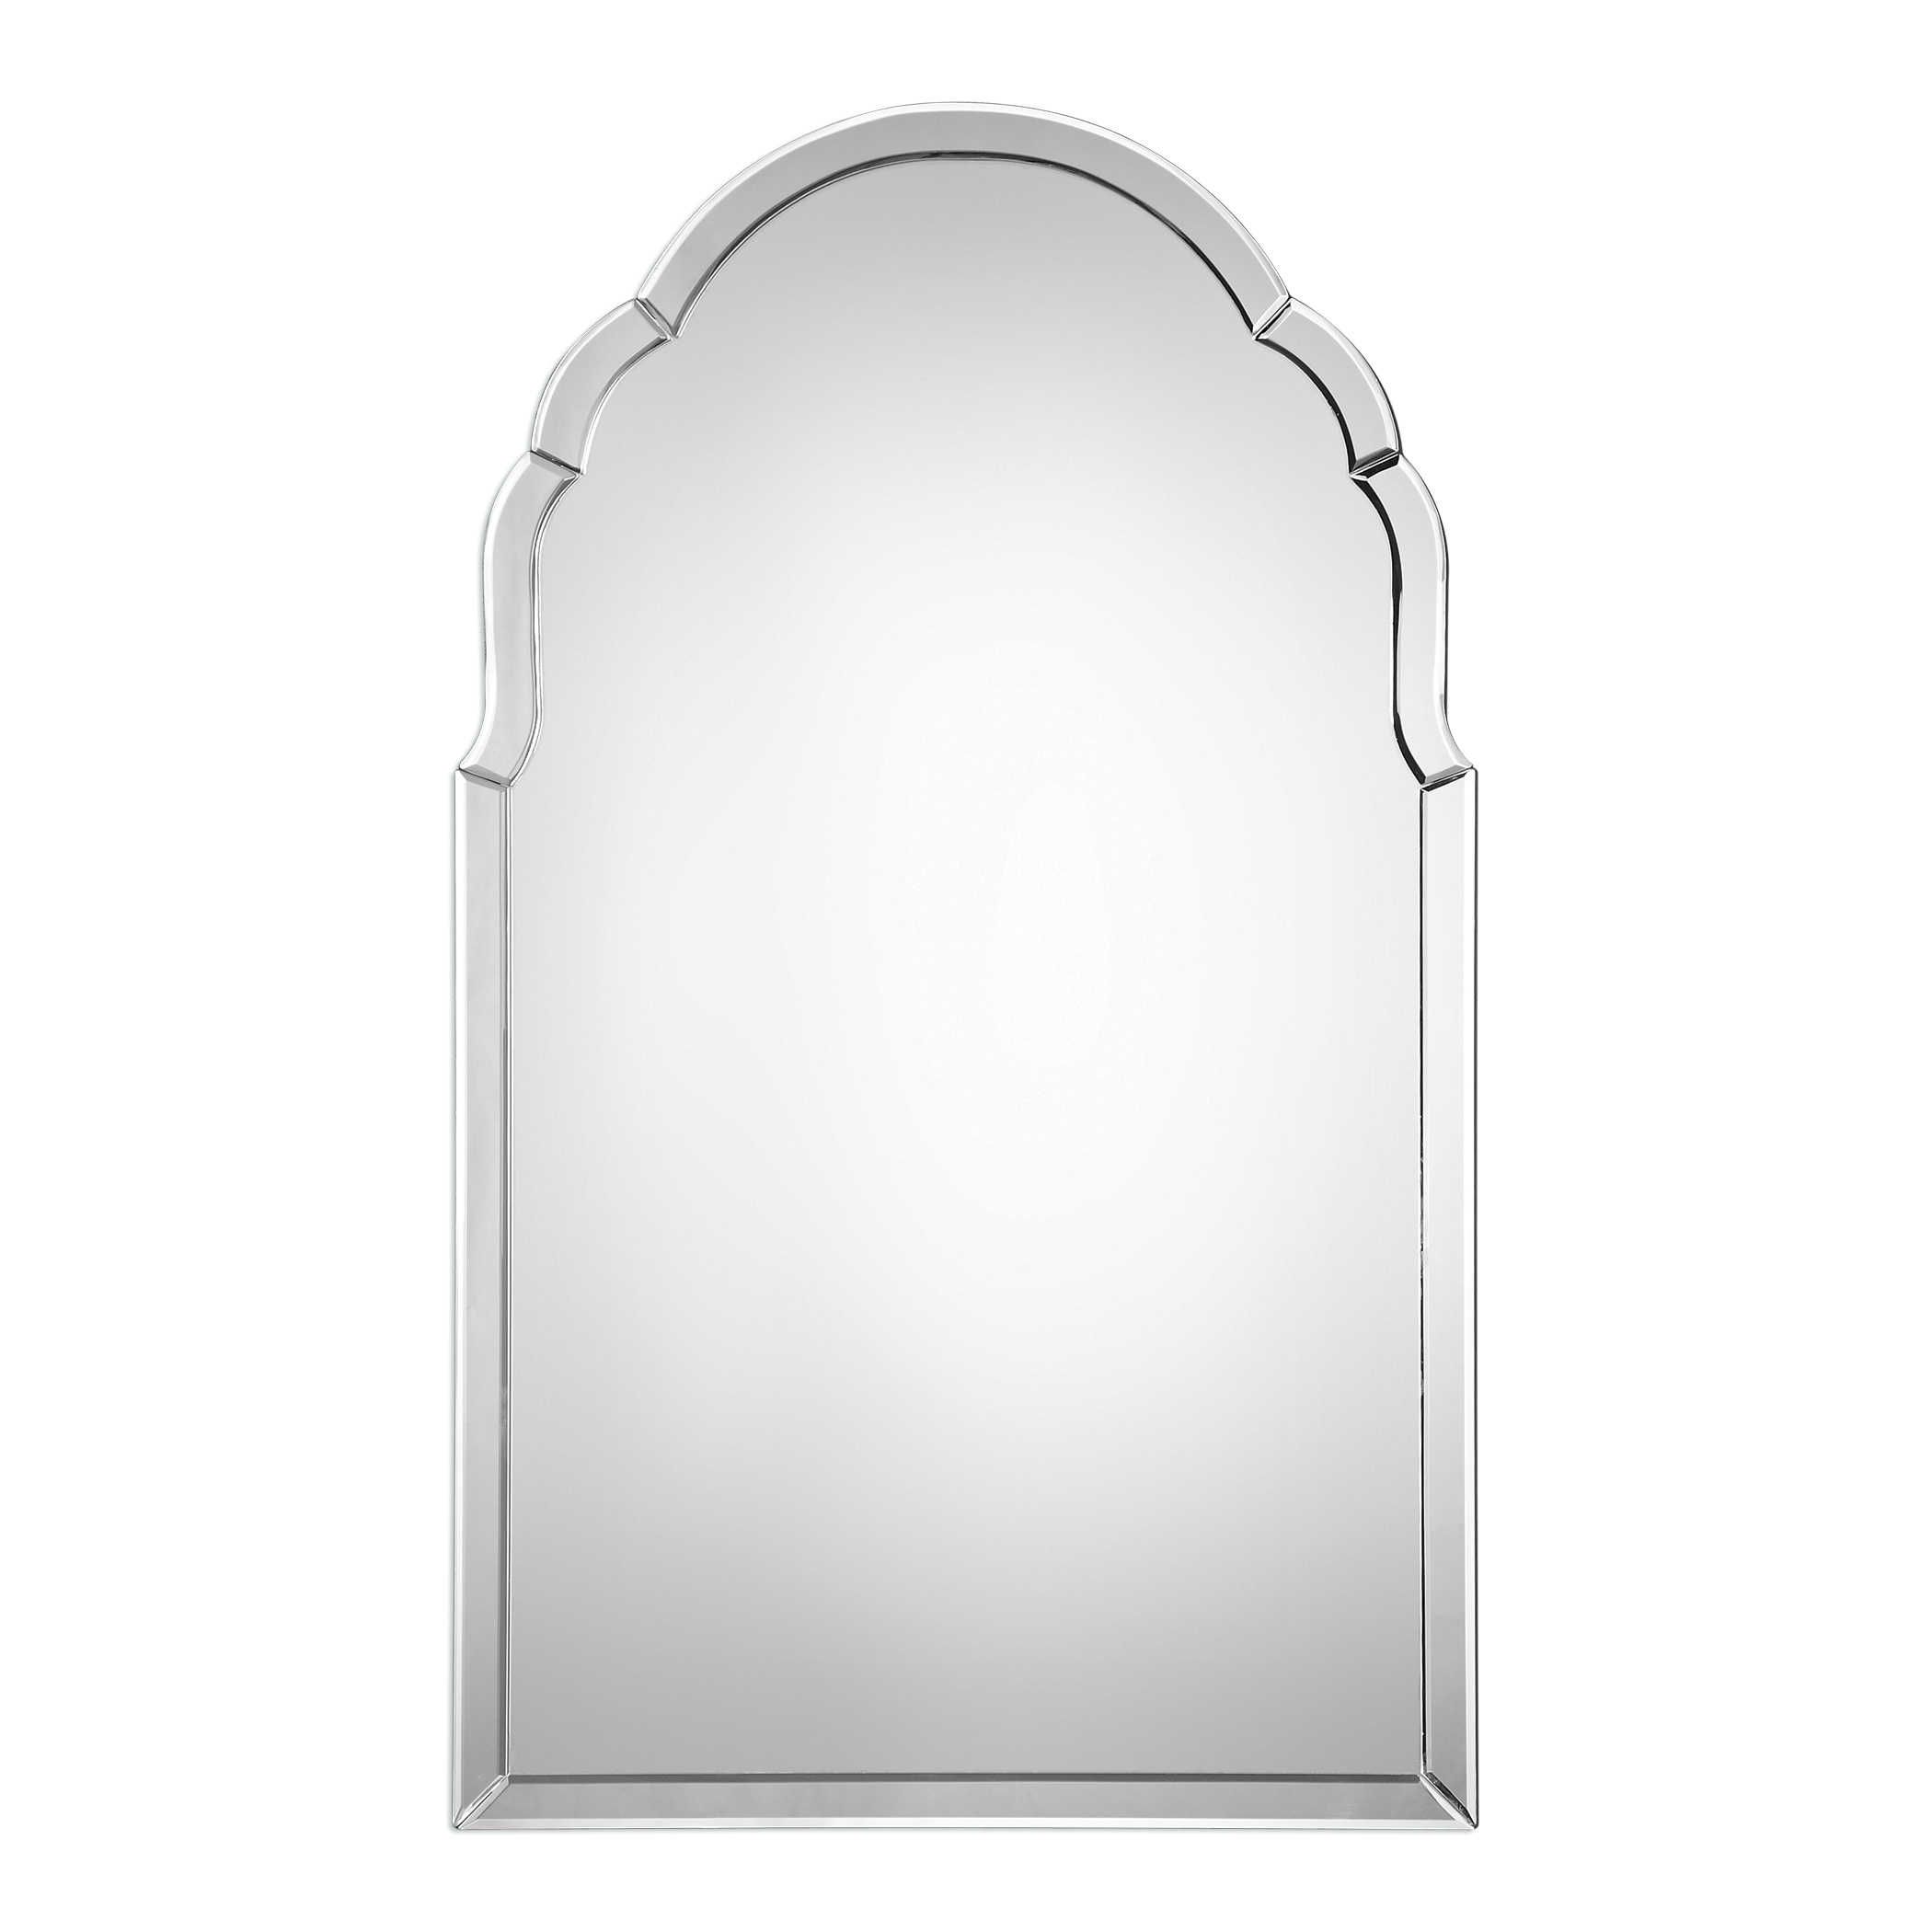 Frameless Venetian Arch Wall Mirror Curved Beveled Glass 792977091494 Regarding Frameless Beveled Wall Mirrors (View 7 of 15)